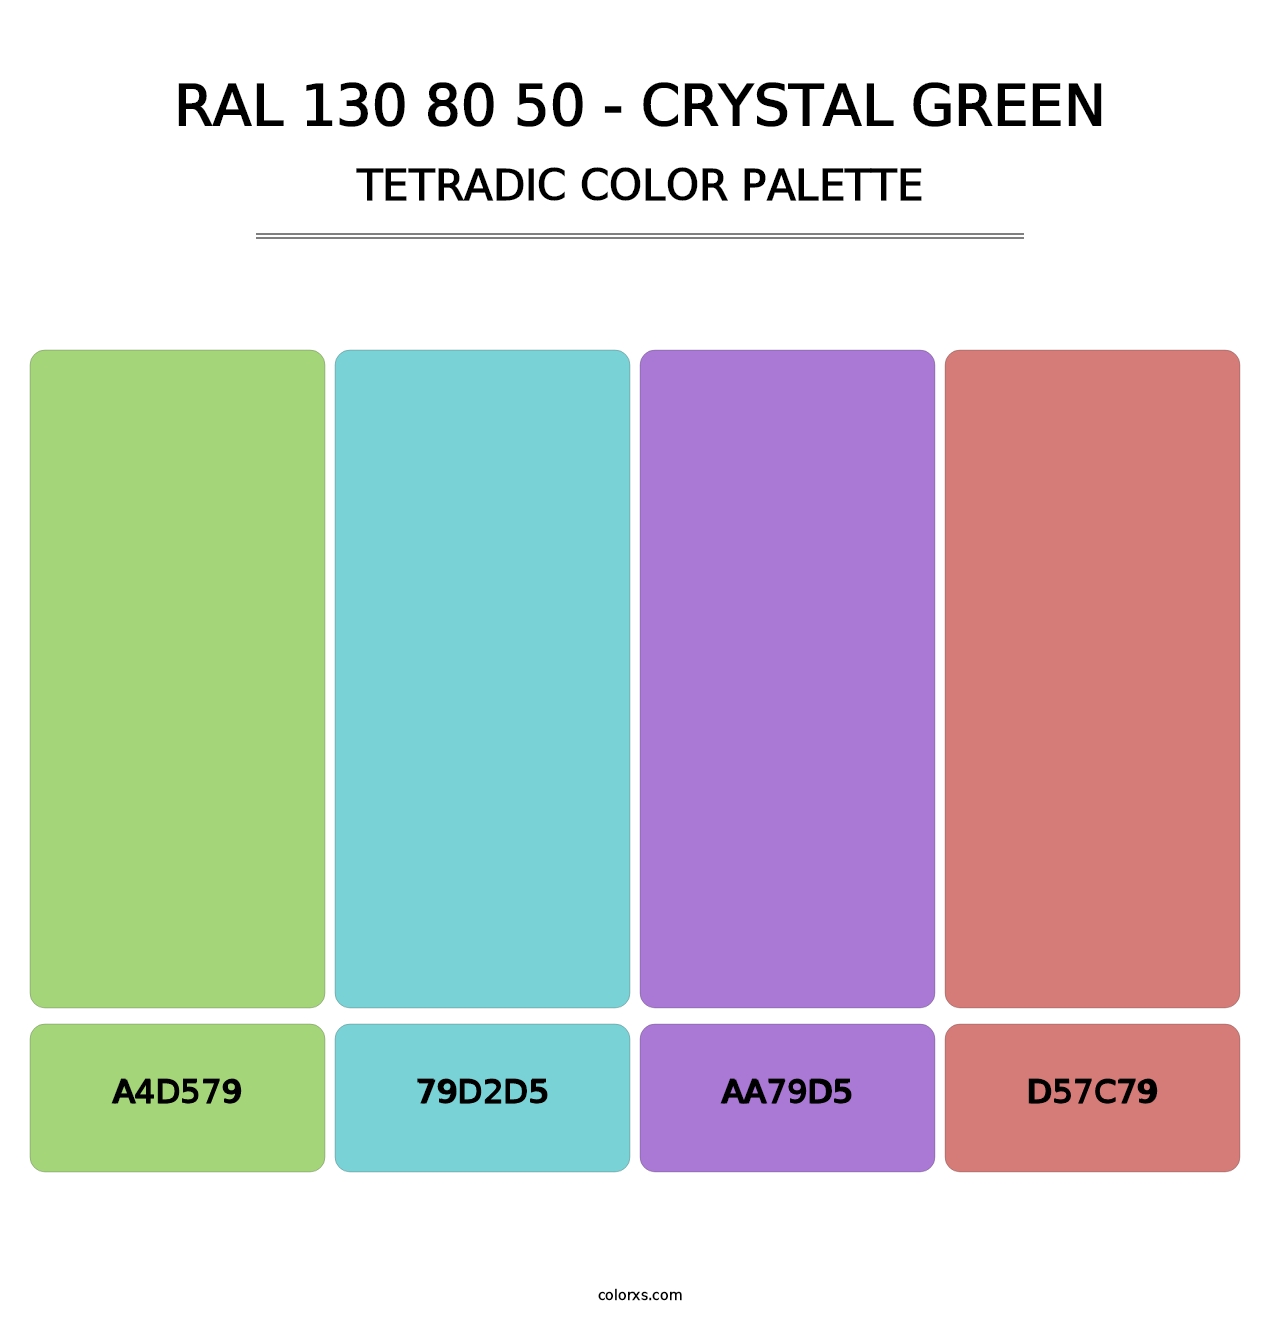 RAL 130 80 50 - Crystal Green - Tetradic Color Palette